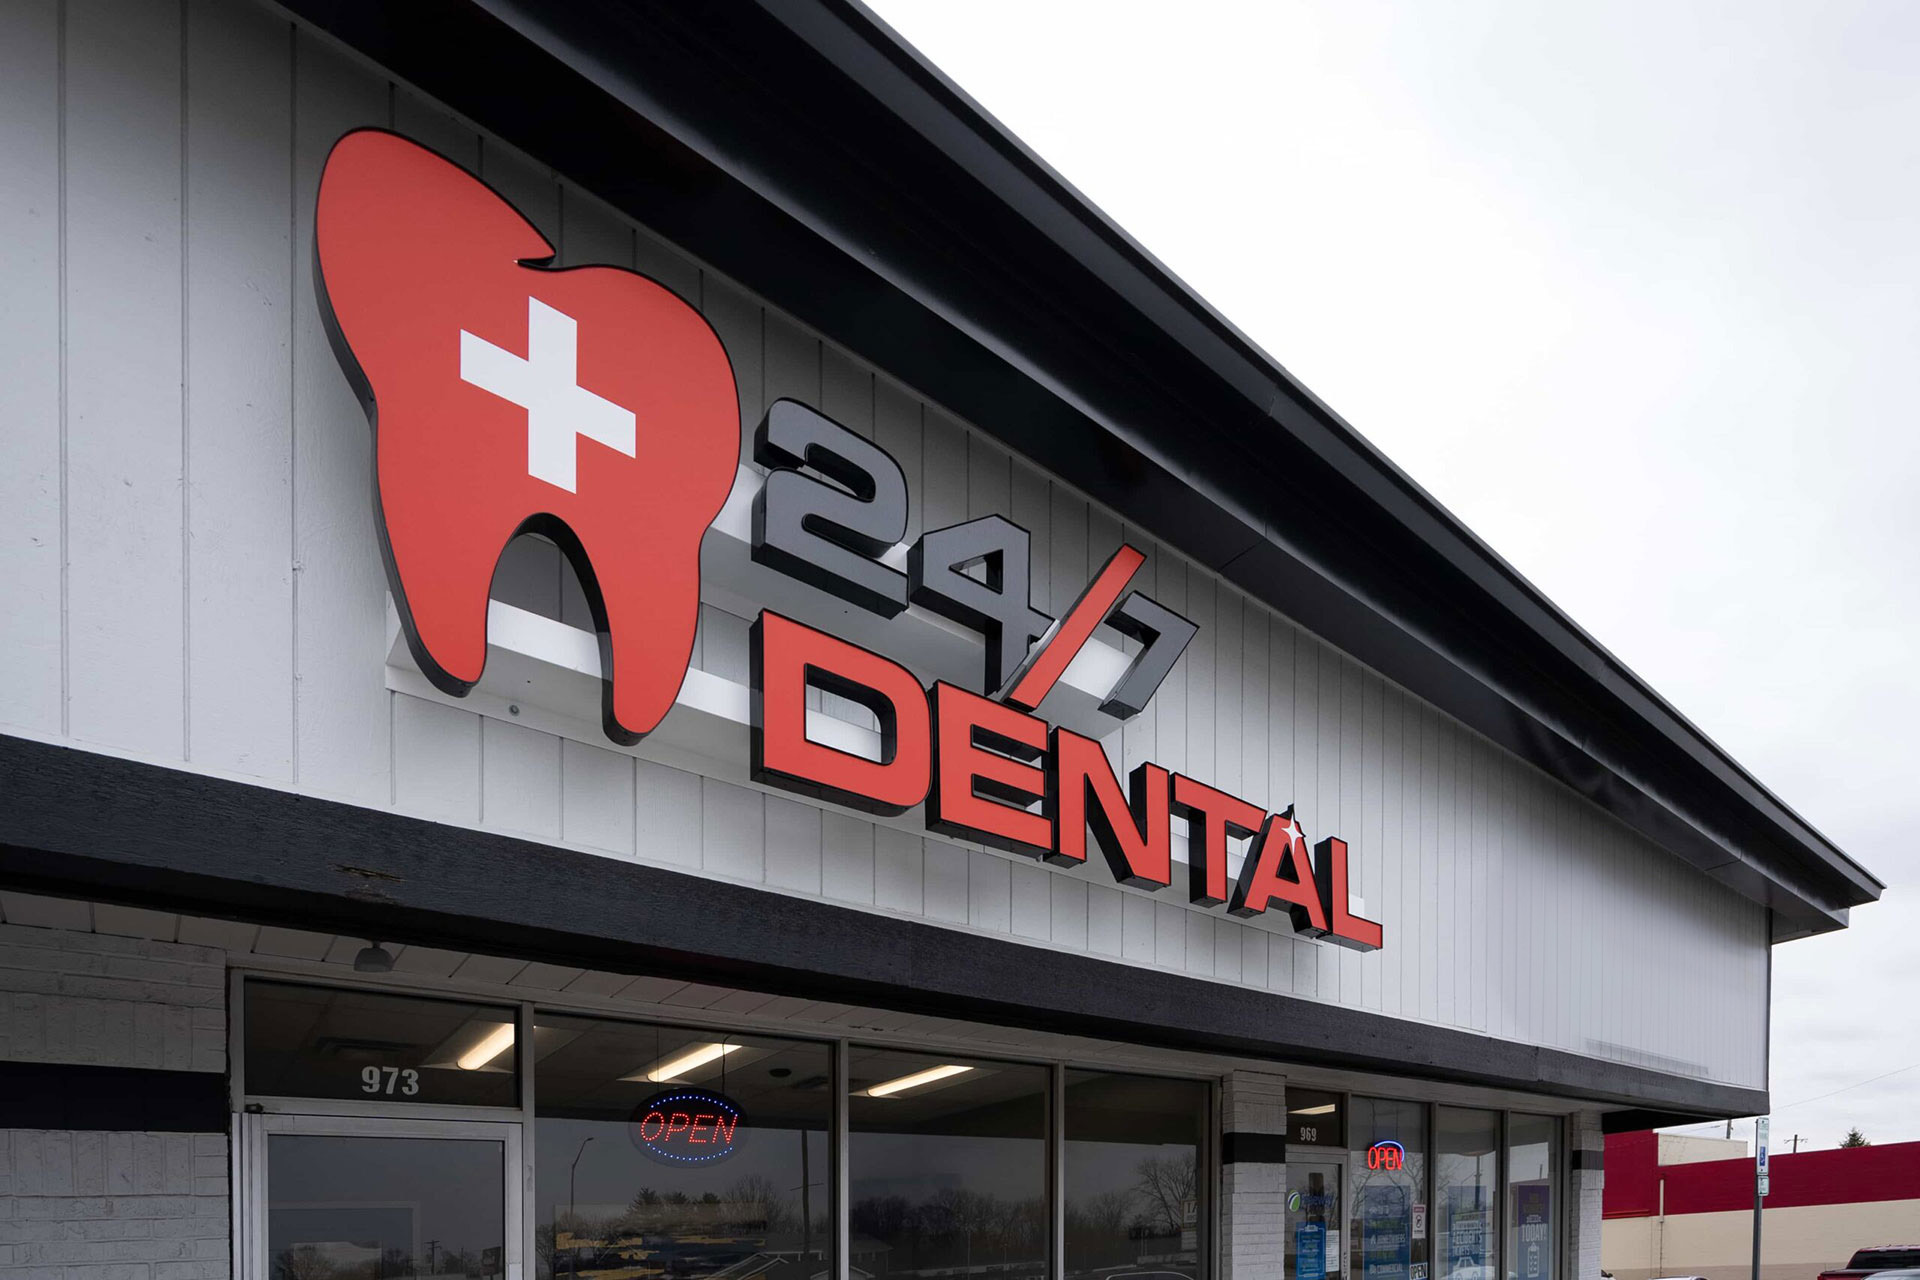 24 7 Dental | Pediatric Dentistry, Implant Dentistry and Dental Cleanings